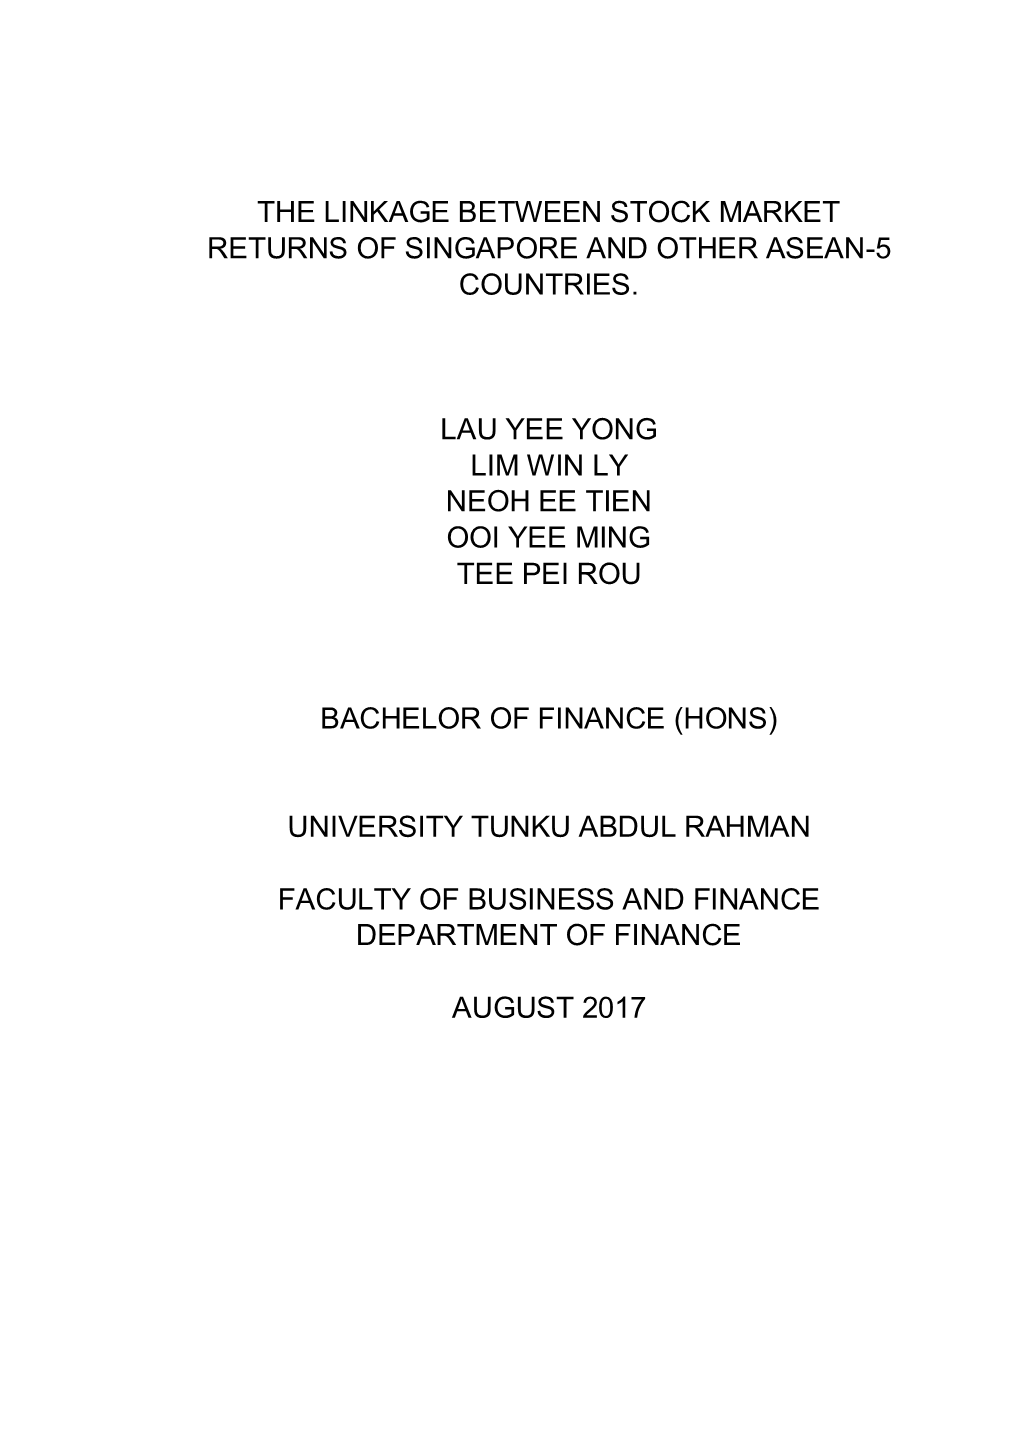 The Linkage Between Stock Market Returns of Singapore and Other Asean-5 Countries